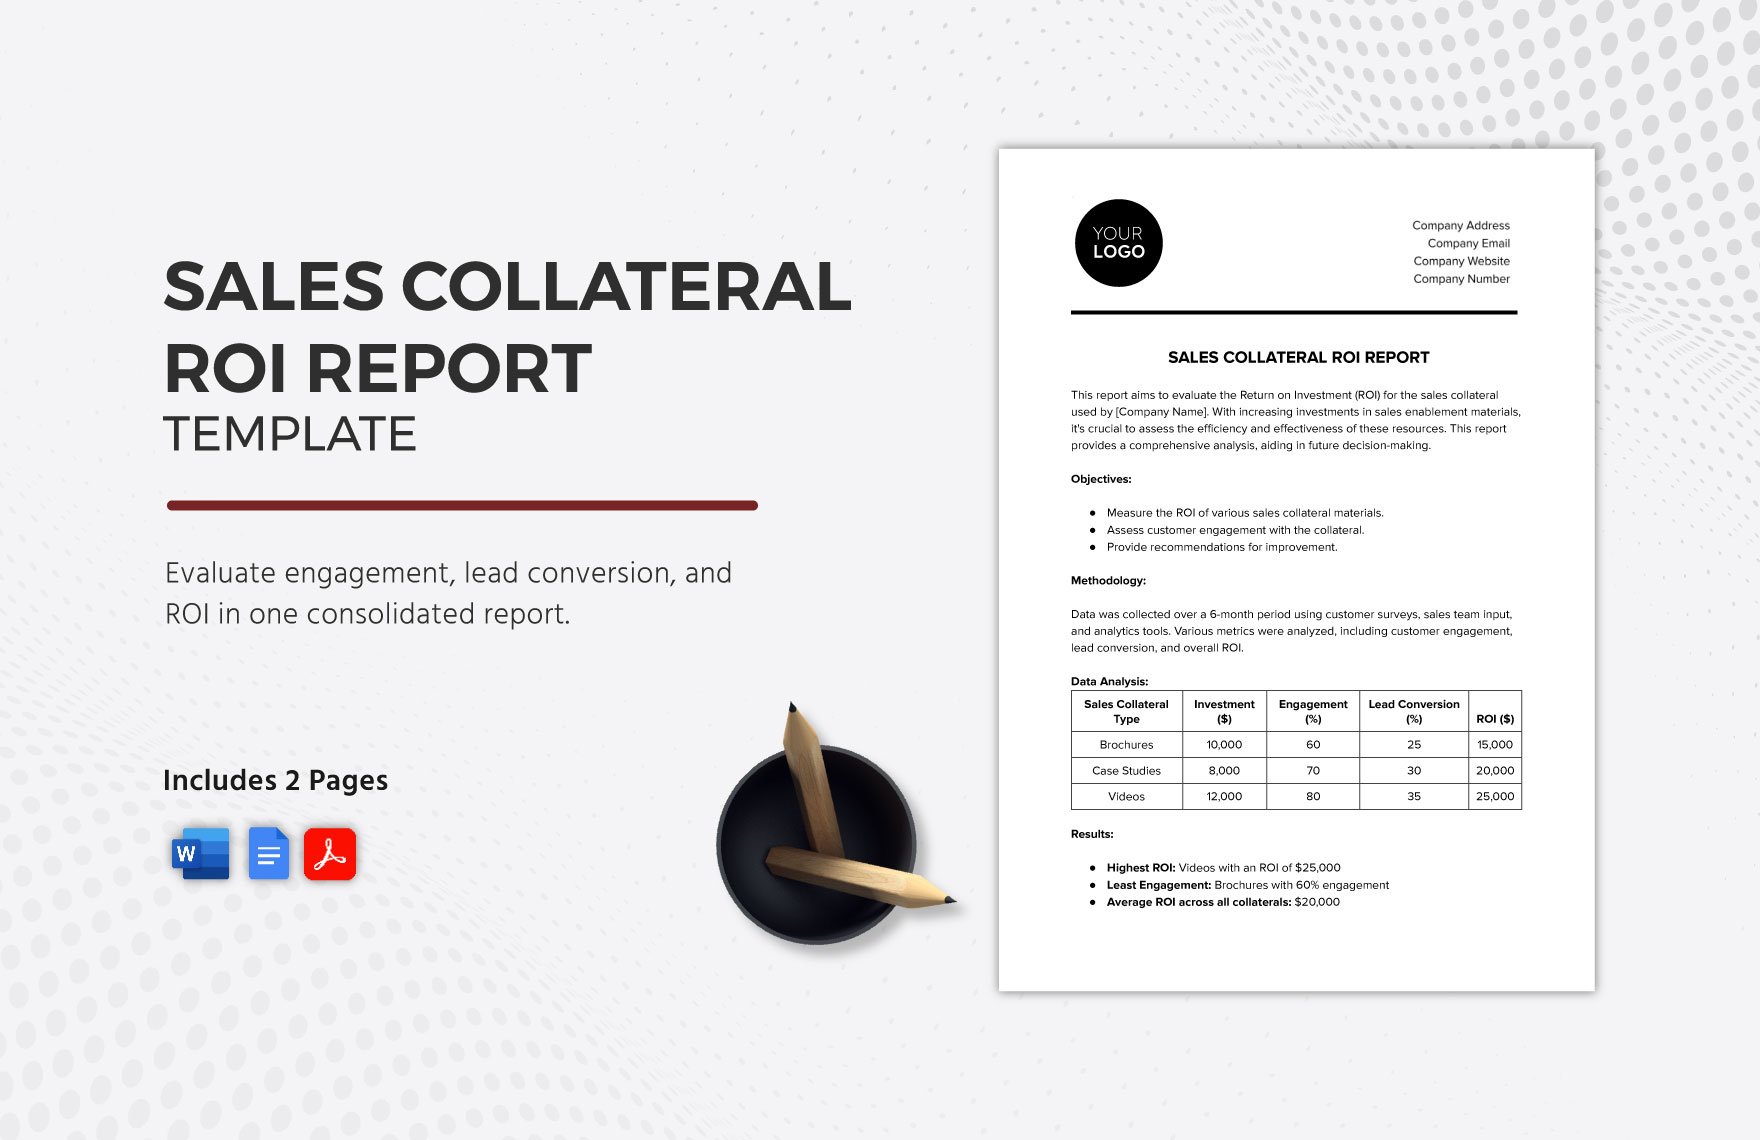 Sales Collateral ROI Report Template